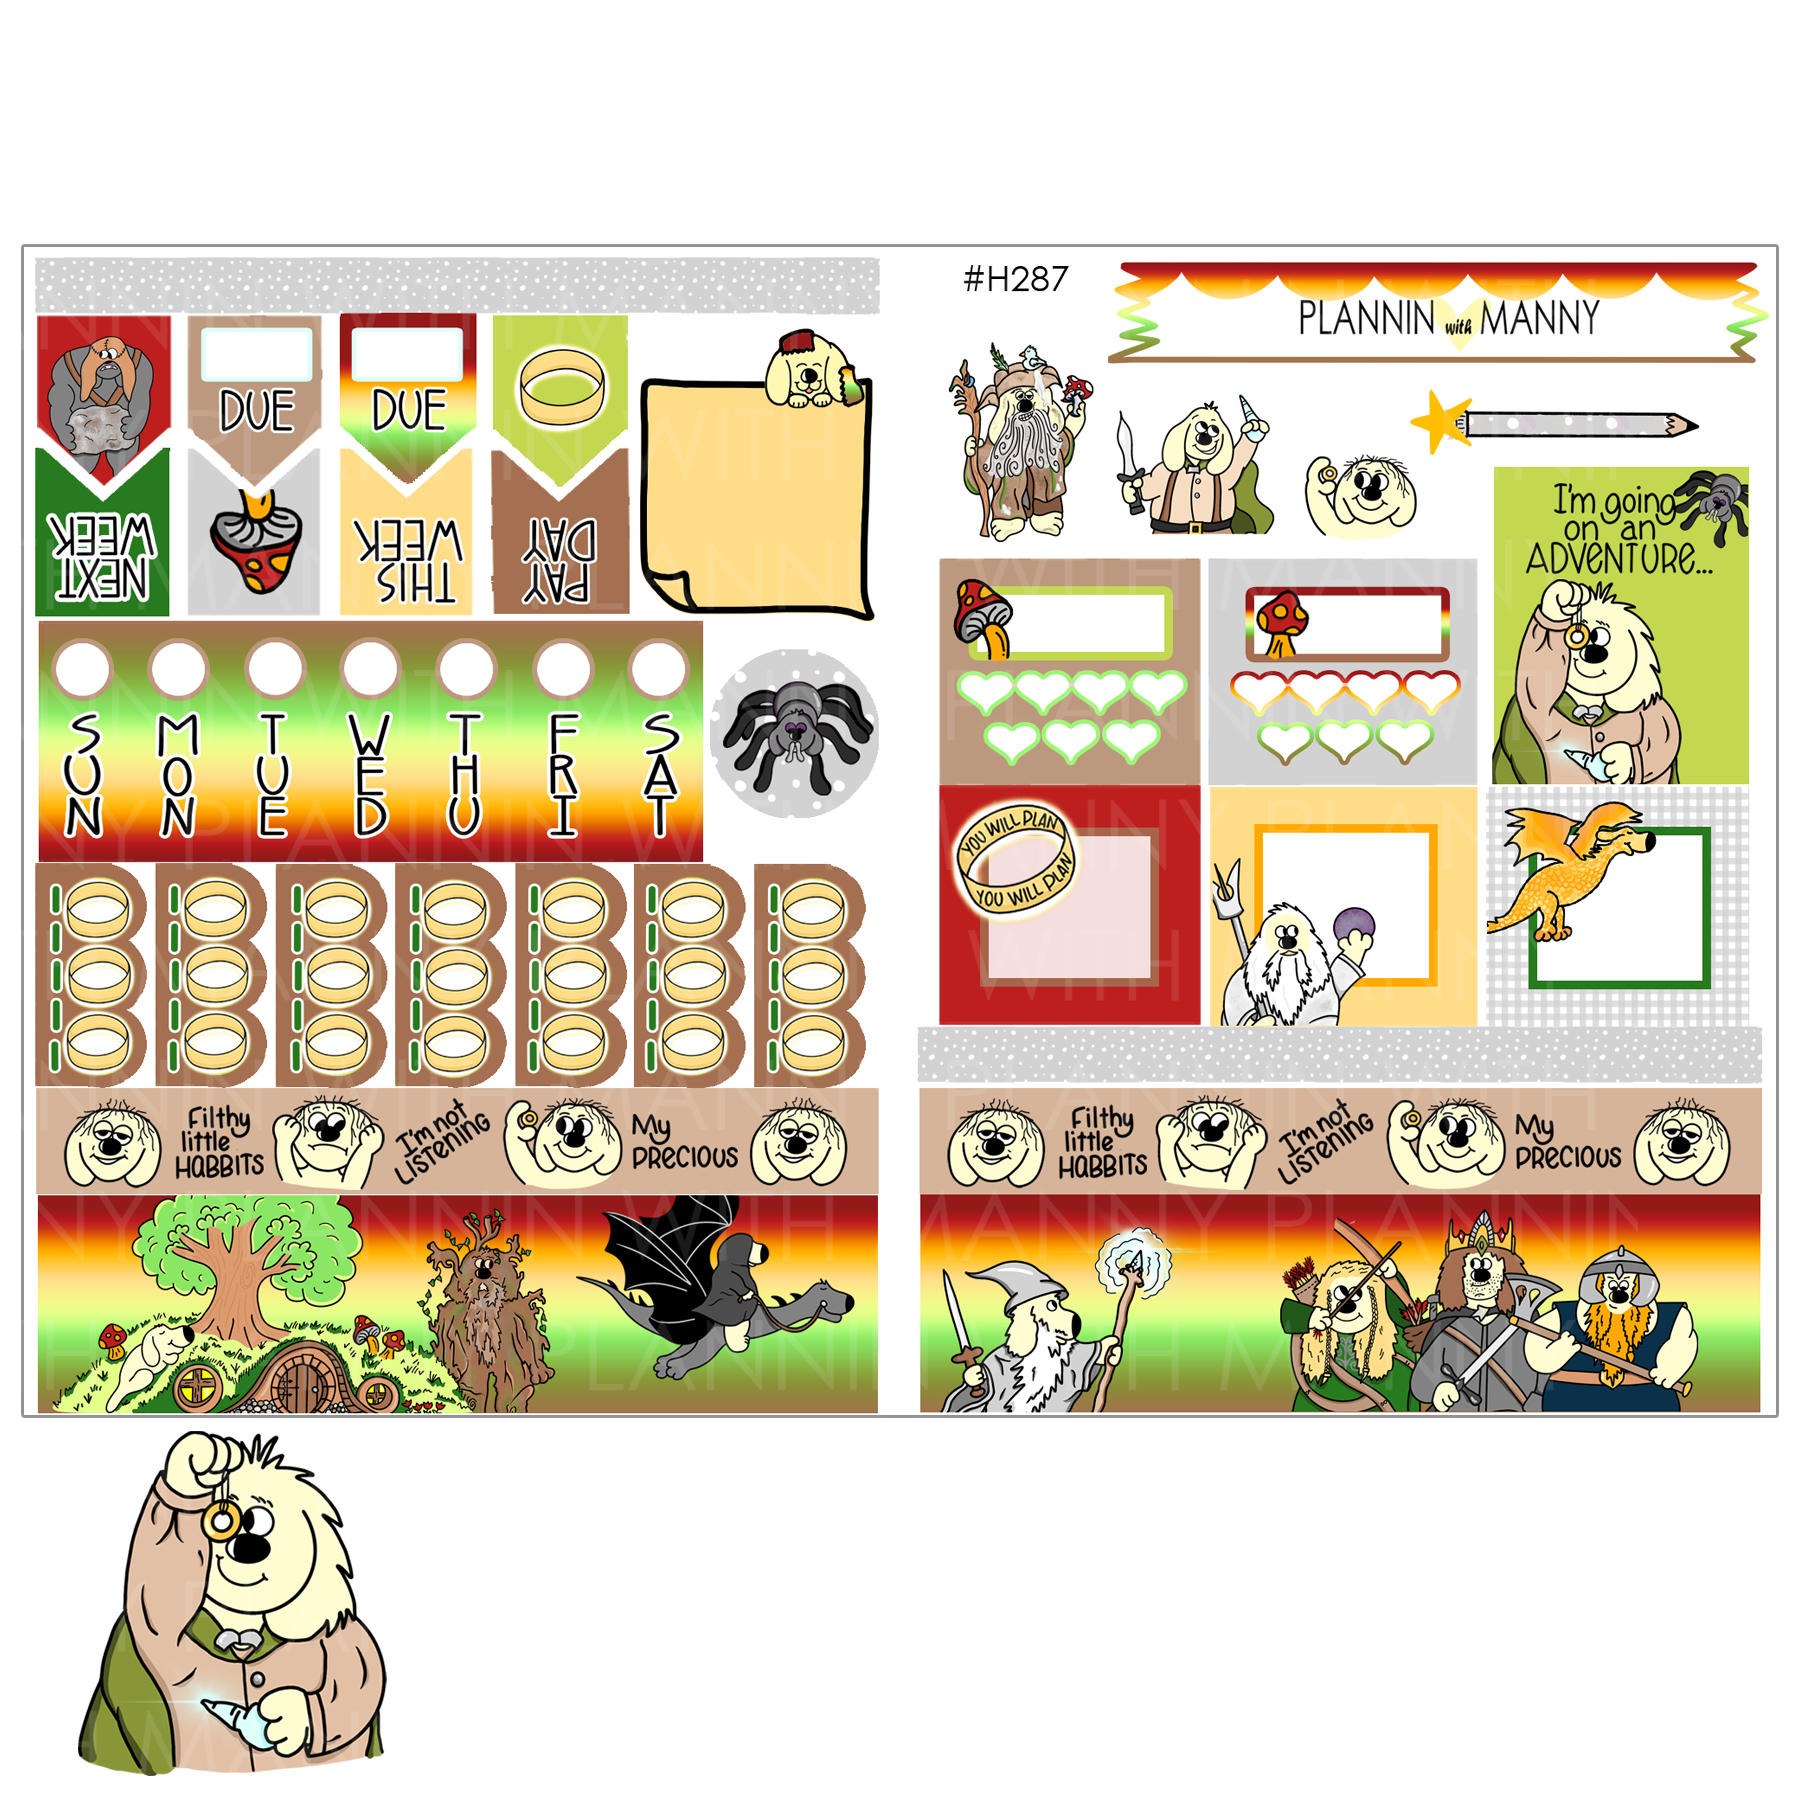 H287 HOBONICHI Weekly Planner Stickers - Manny's Hobbit Adventure Collection